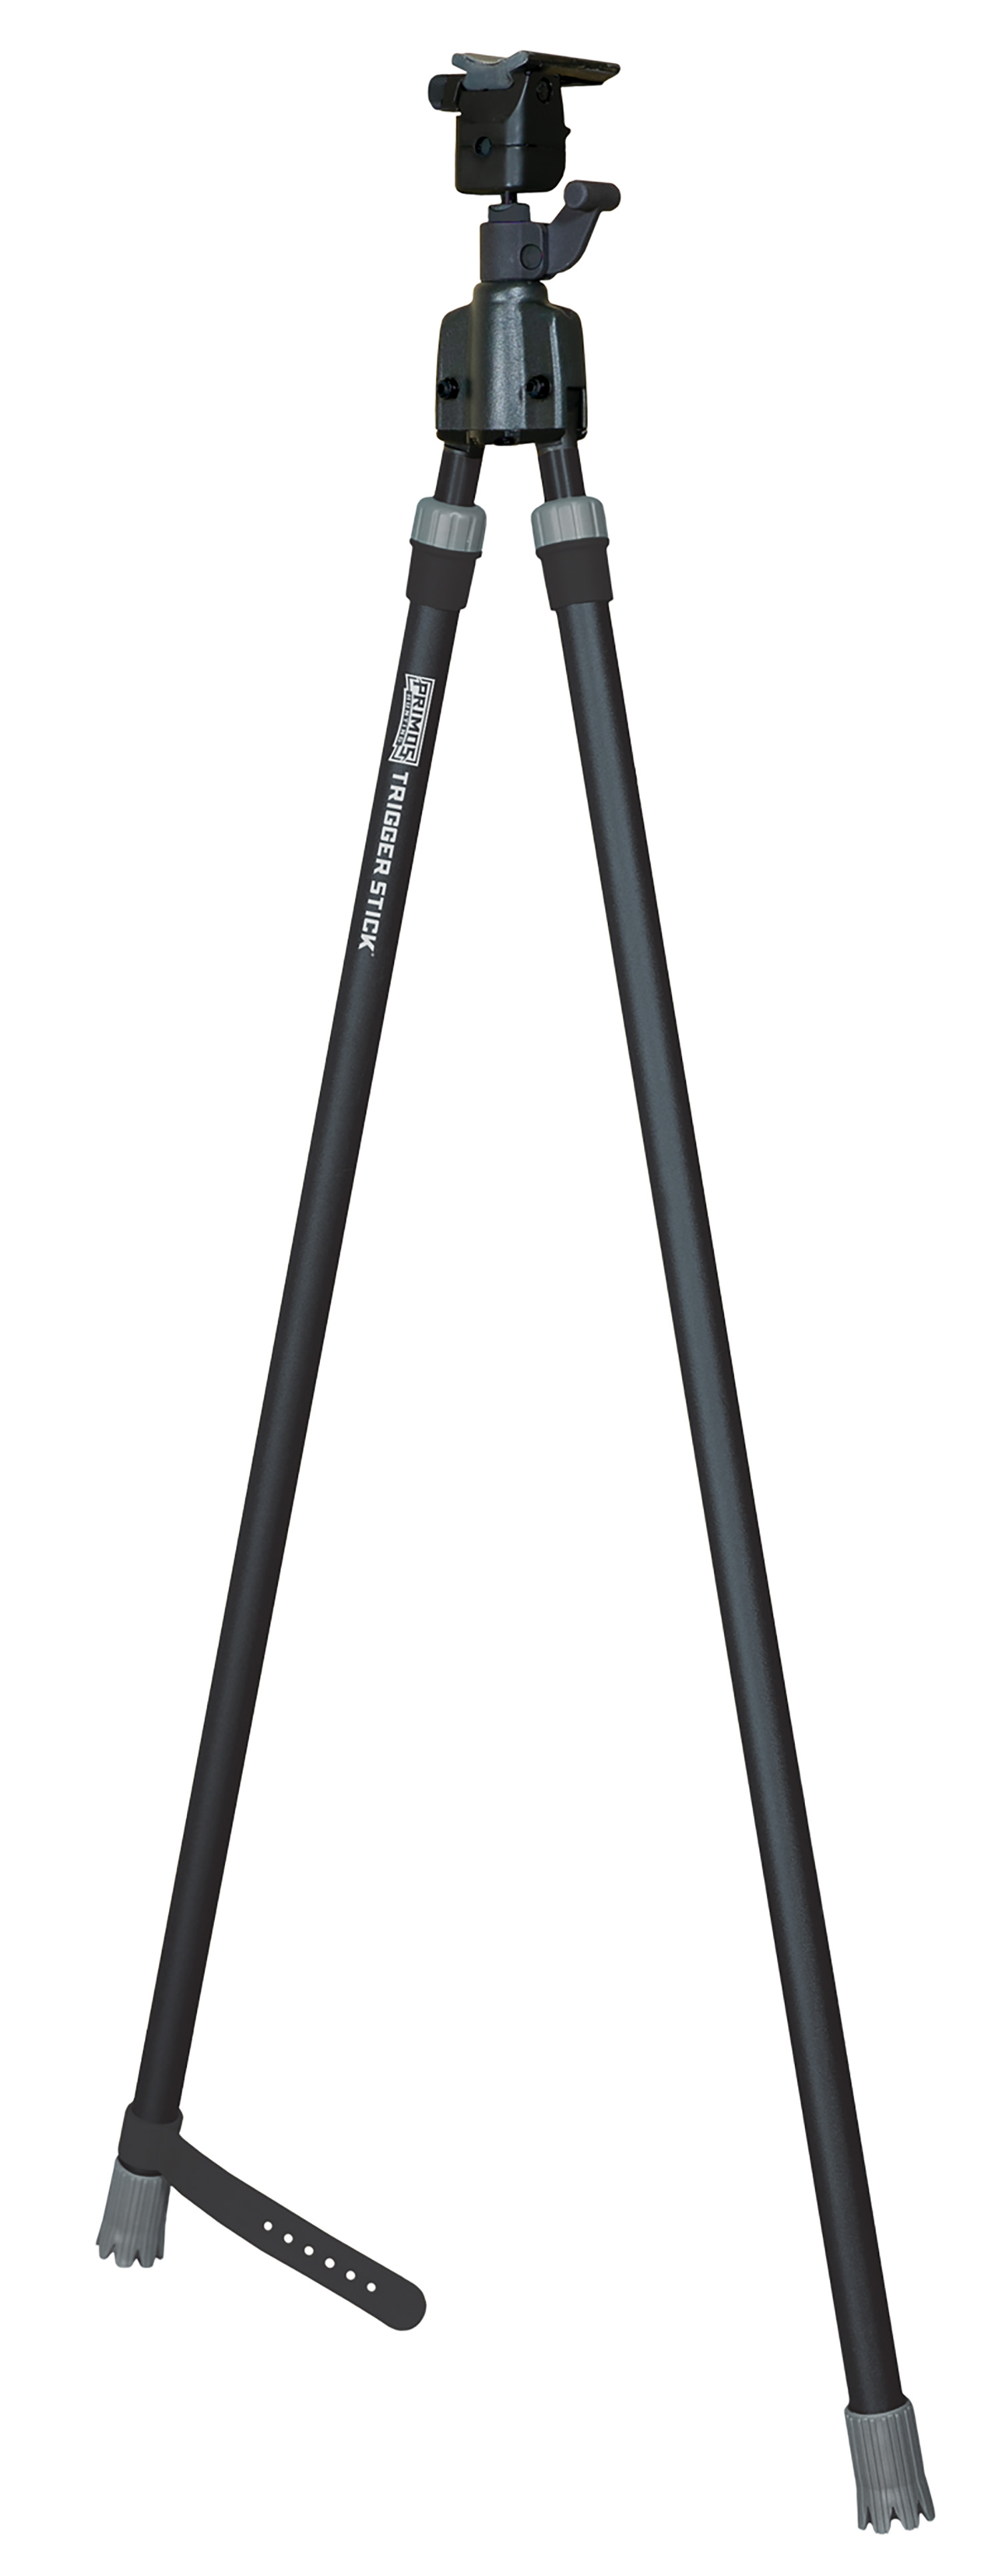 Primos 65827 Trigger Stick  Bipod made of Steel with Black & Gray Finish, QD Swivel Stud Attachment Type & Tall Height (Clam Package)